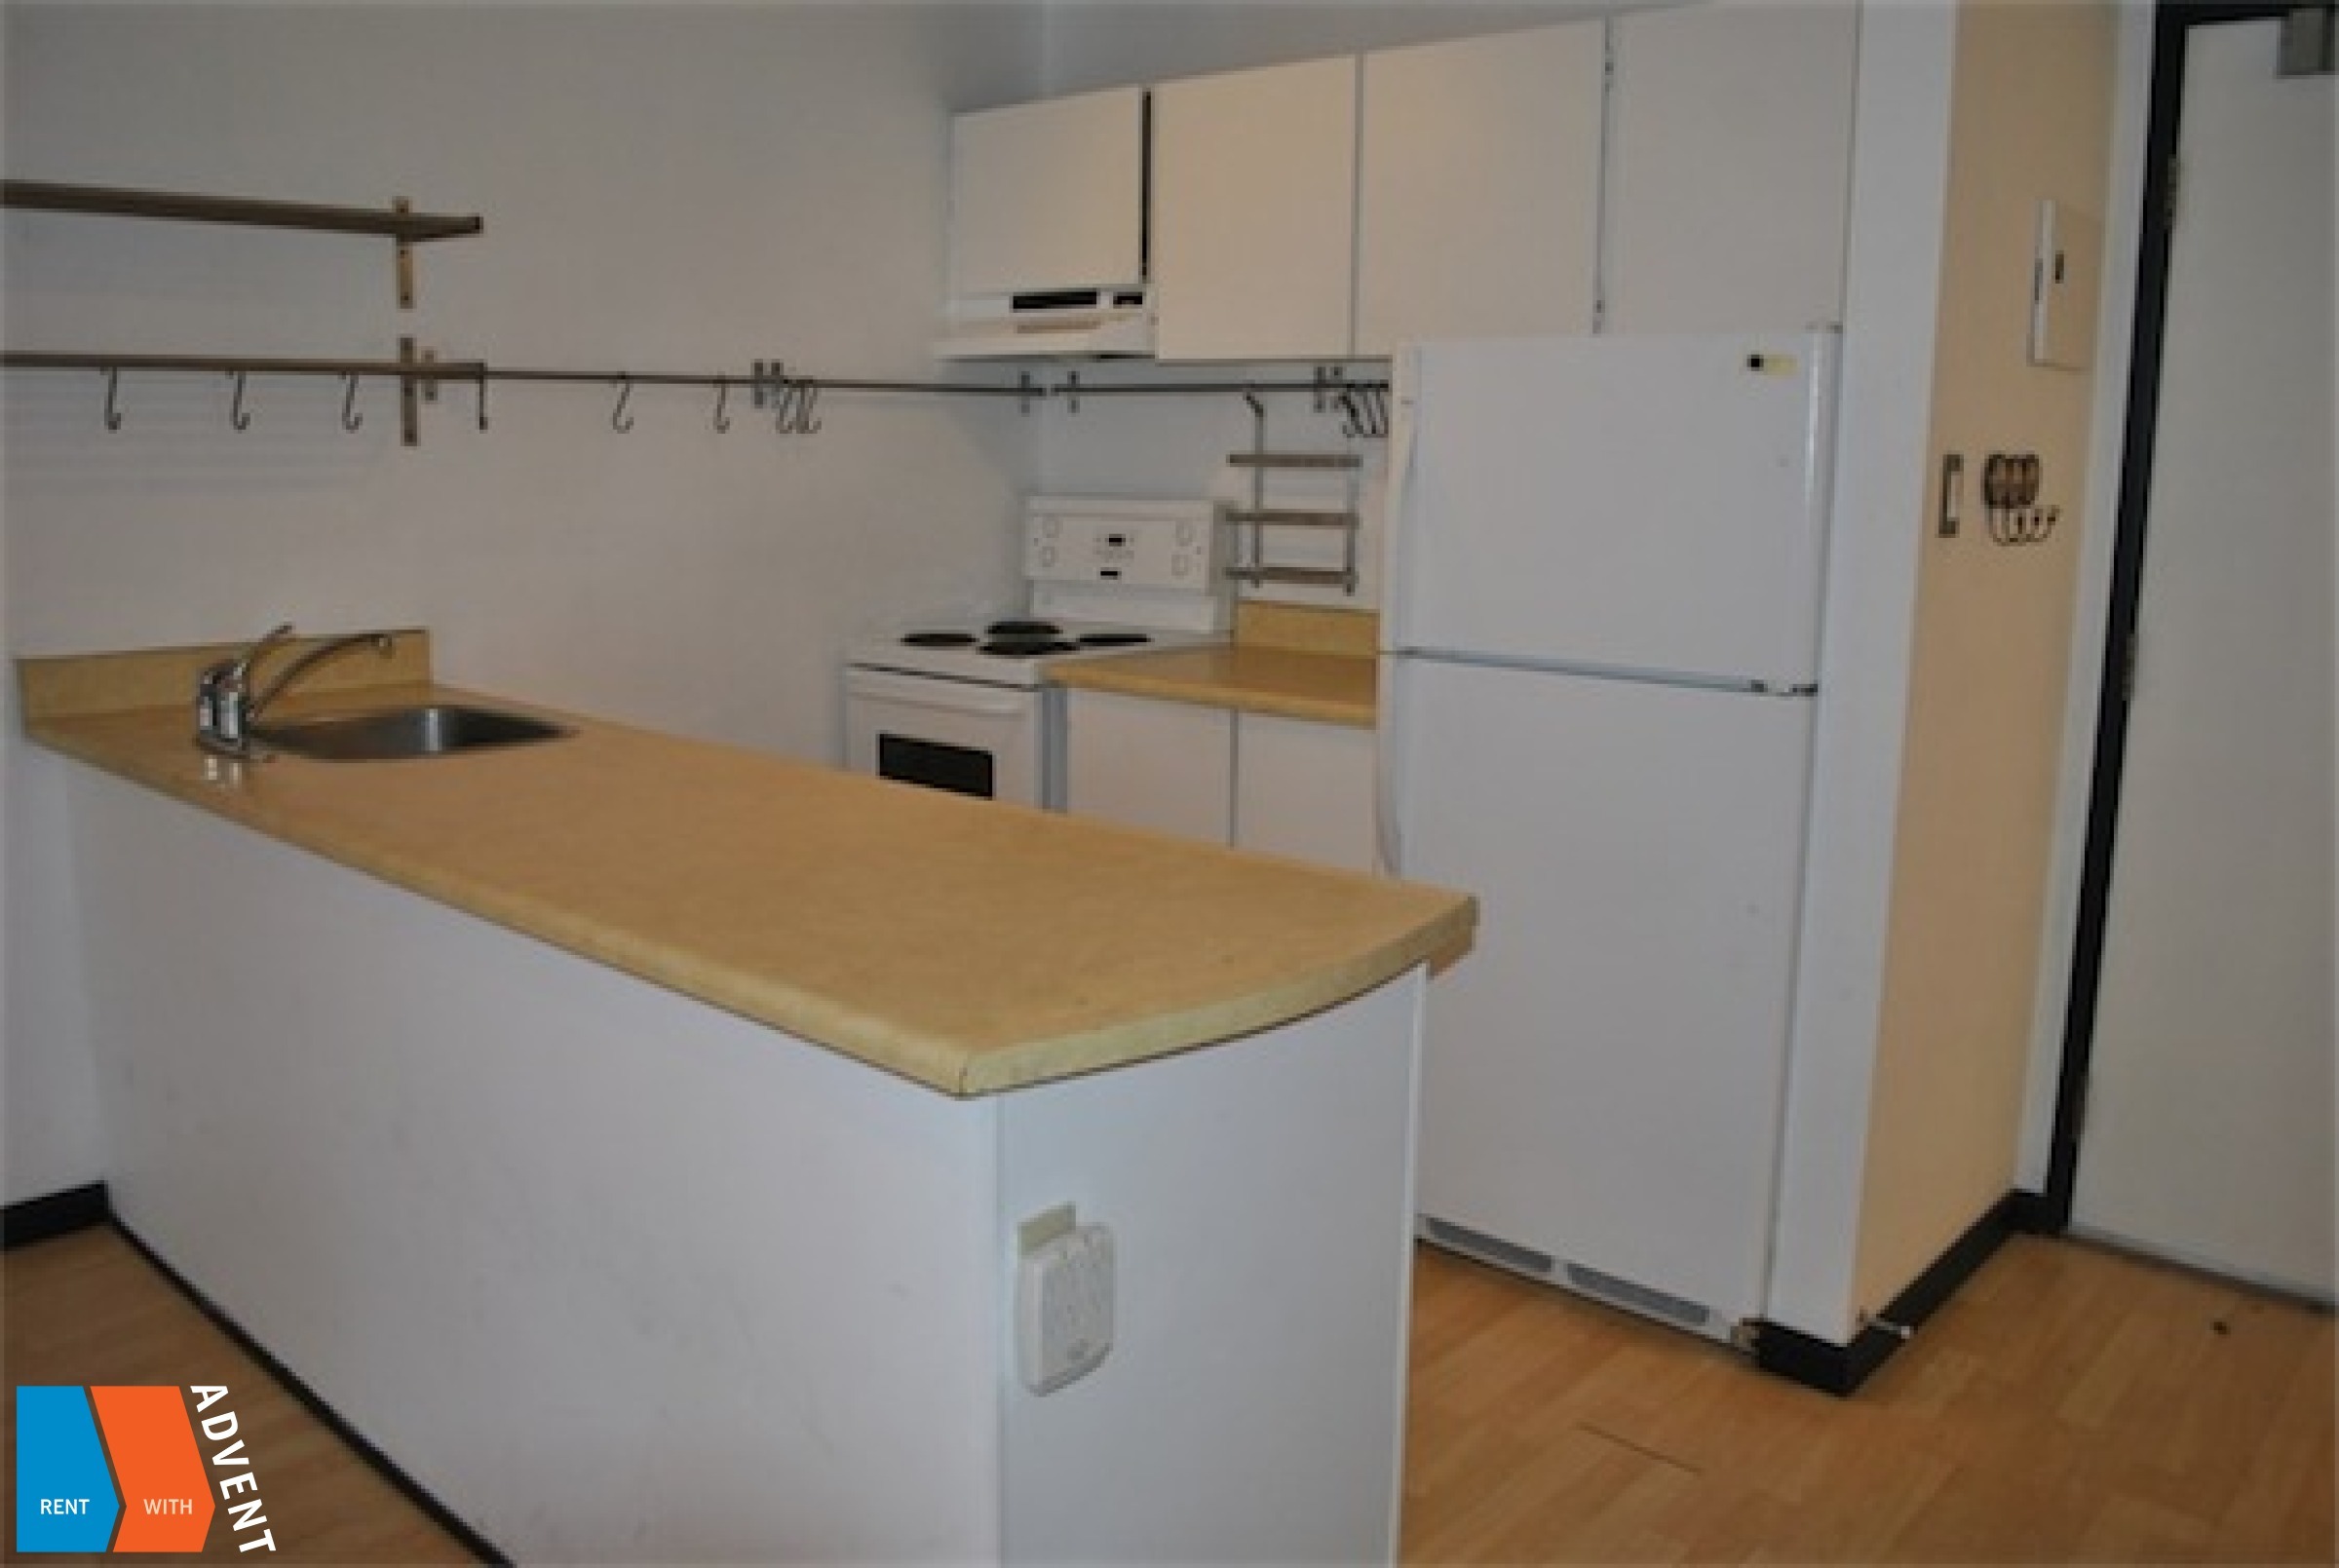 Unfurnished 1 Bedroom Apartment For Rent at Anchor Point in Vancouver. 111 - 950 Drake Street, Vancouver, BC, Canada.